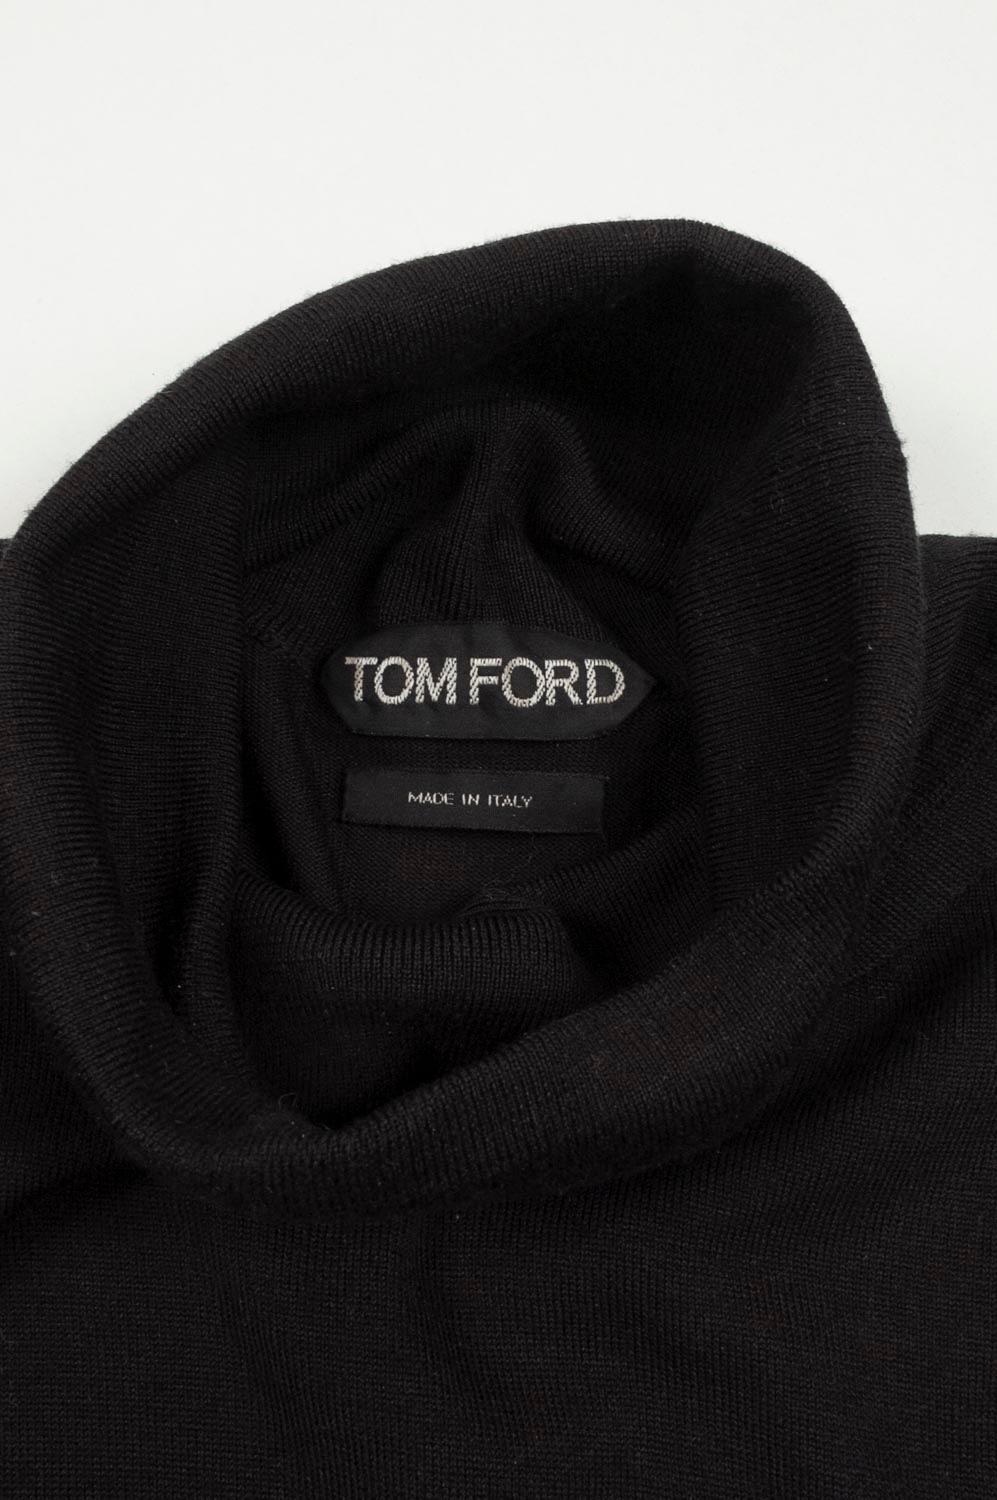 Tom Ford Wool Men Sweater Turtle Neck Size 52IT (Large), S454 For Sale 1